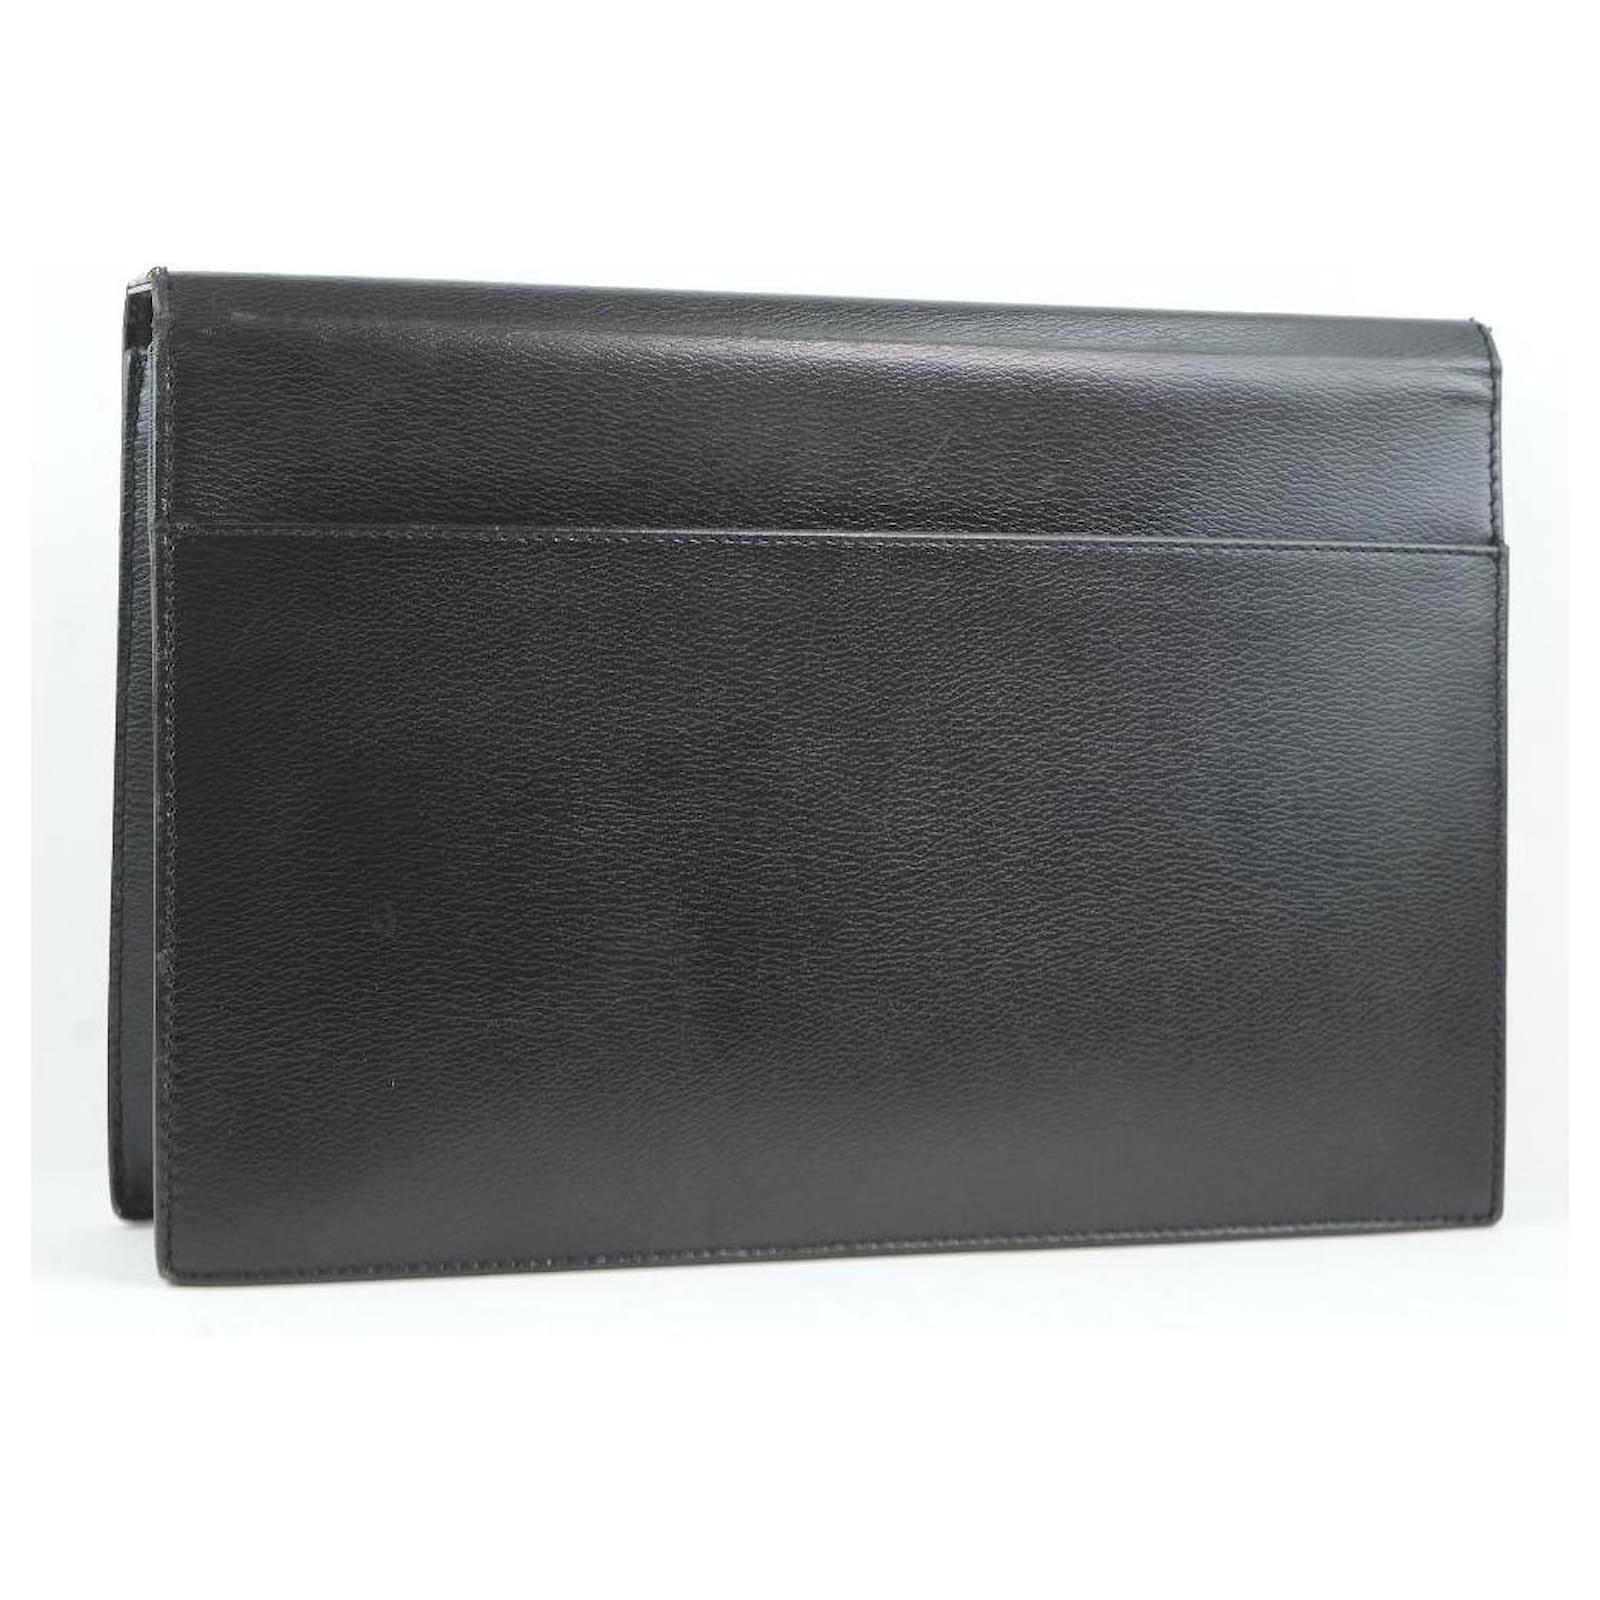 Alfred Dunhill Dunhill Clutch bag Black Leather ref.369510 - Joli Closet